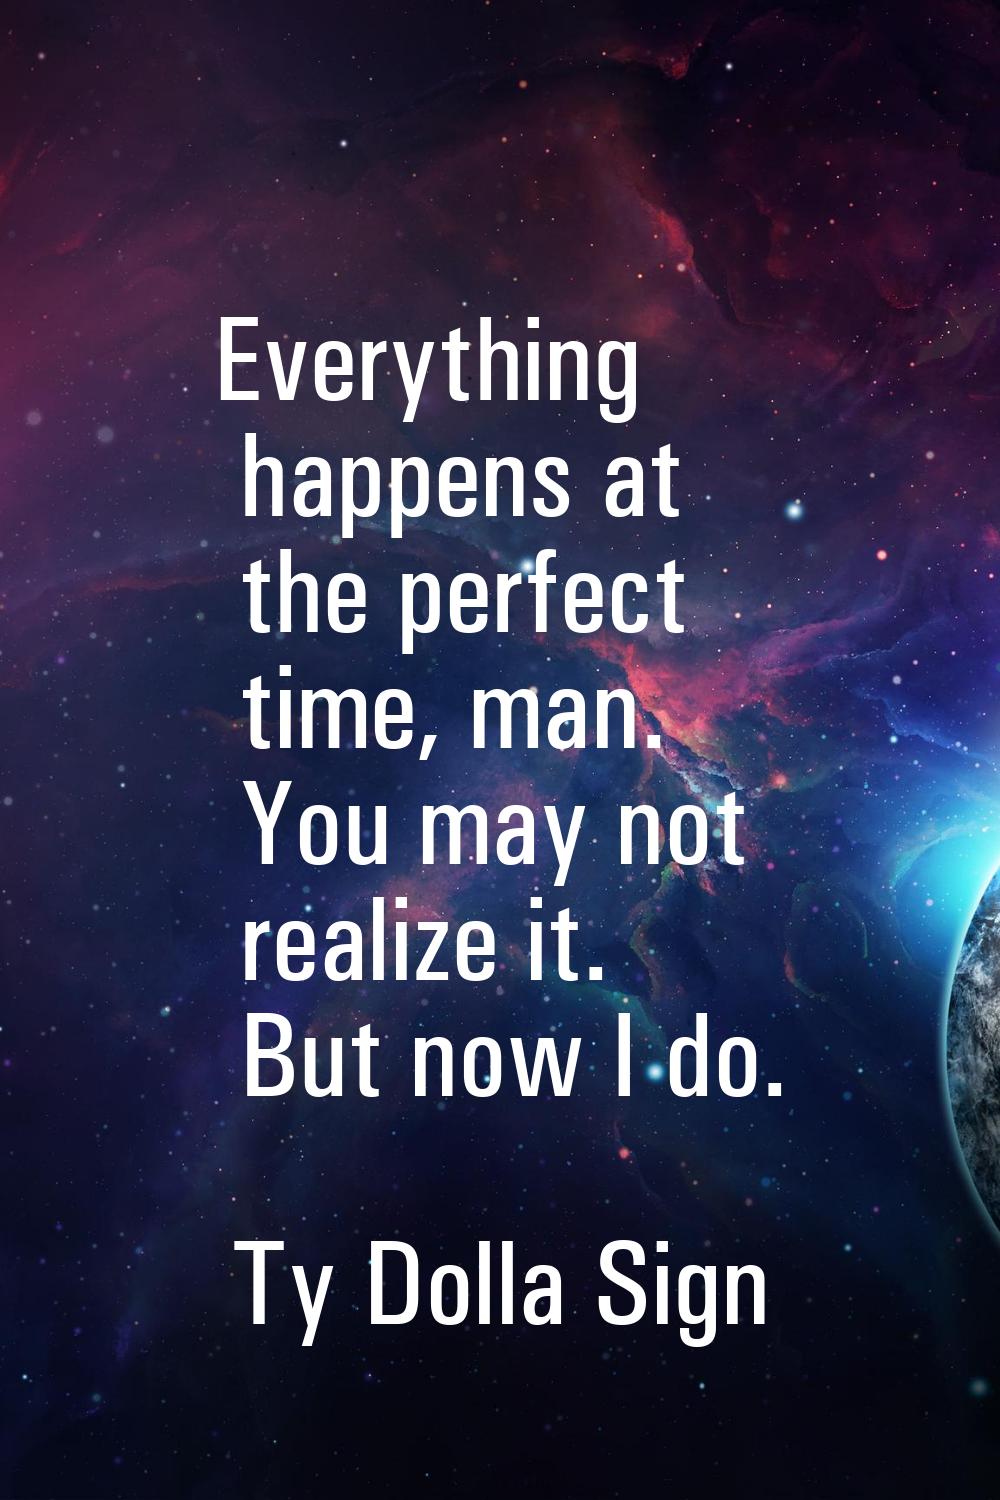 Everything happens at the perfect time, man. You may not realize it. But now I do.